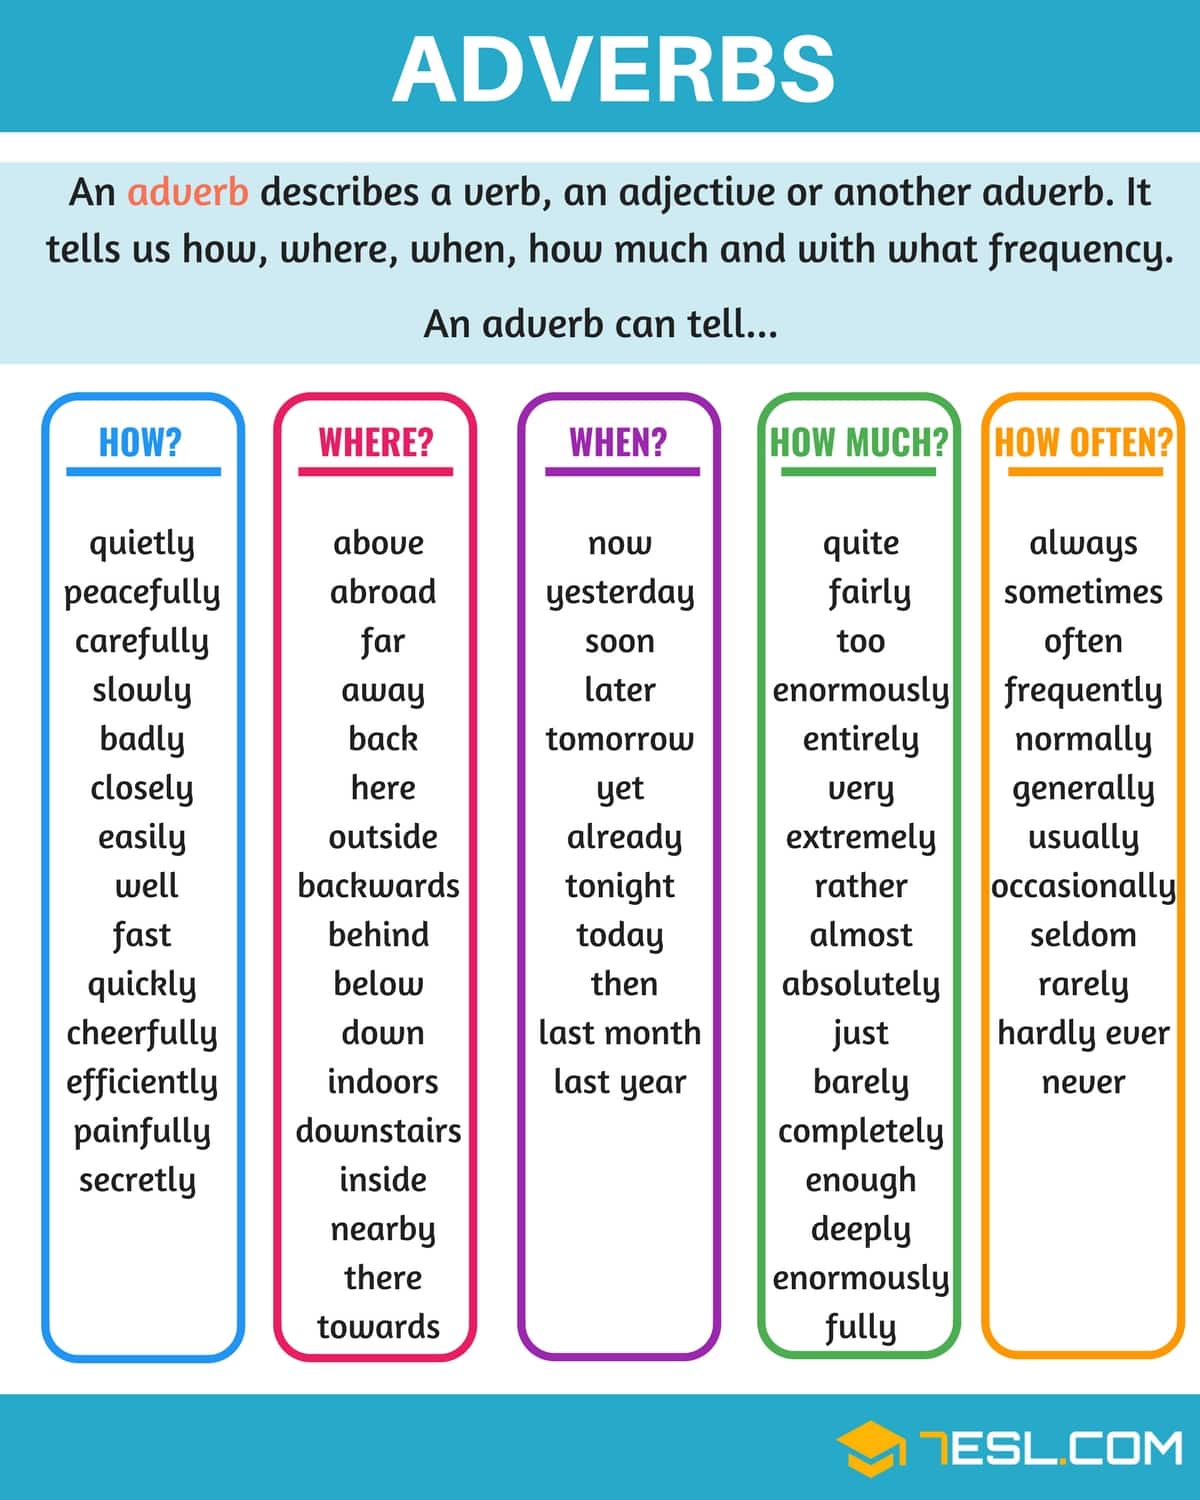 English Adverbs: A Complete Grammar Guide